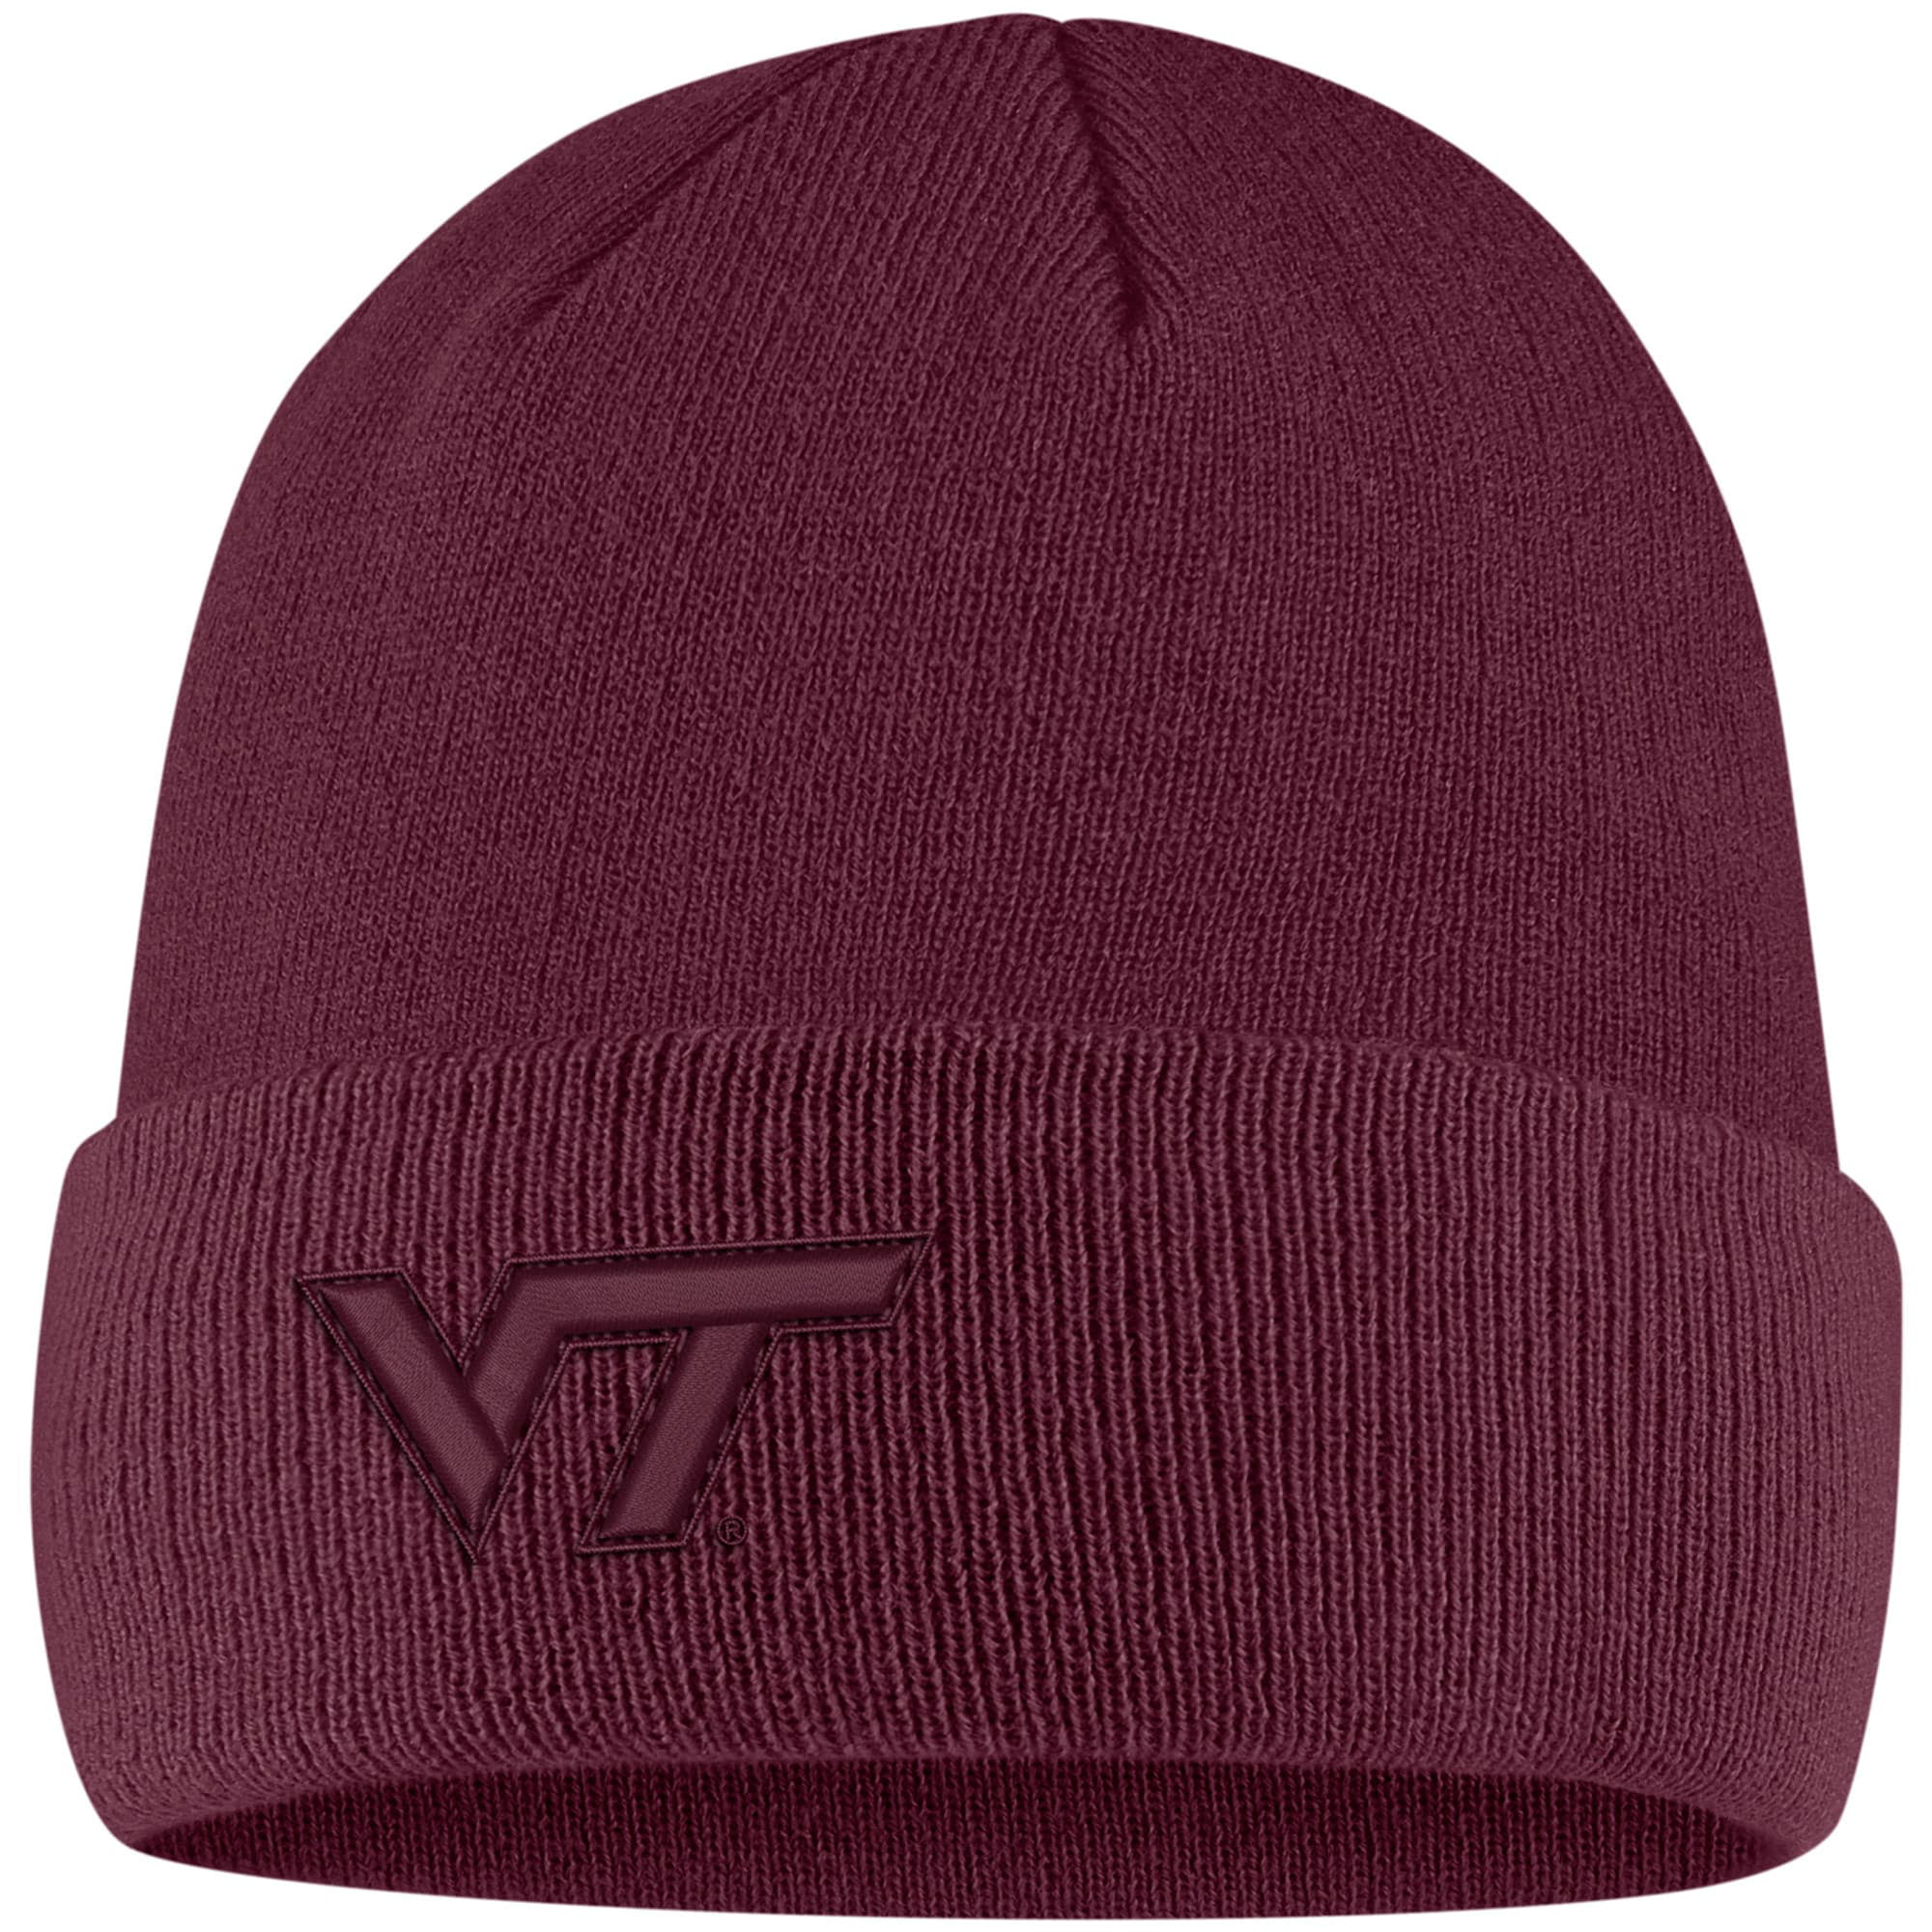 Campus Colors Adult Ultra Soft Fleece Lined Knit Beanie 